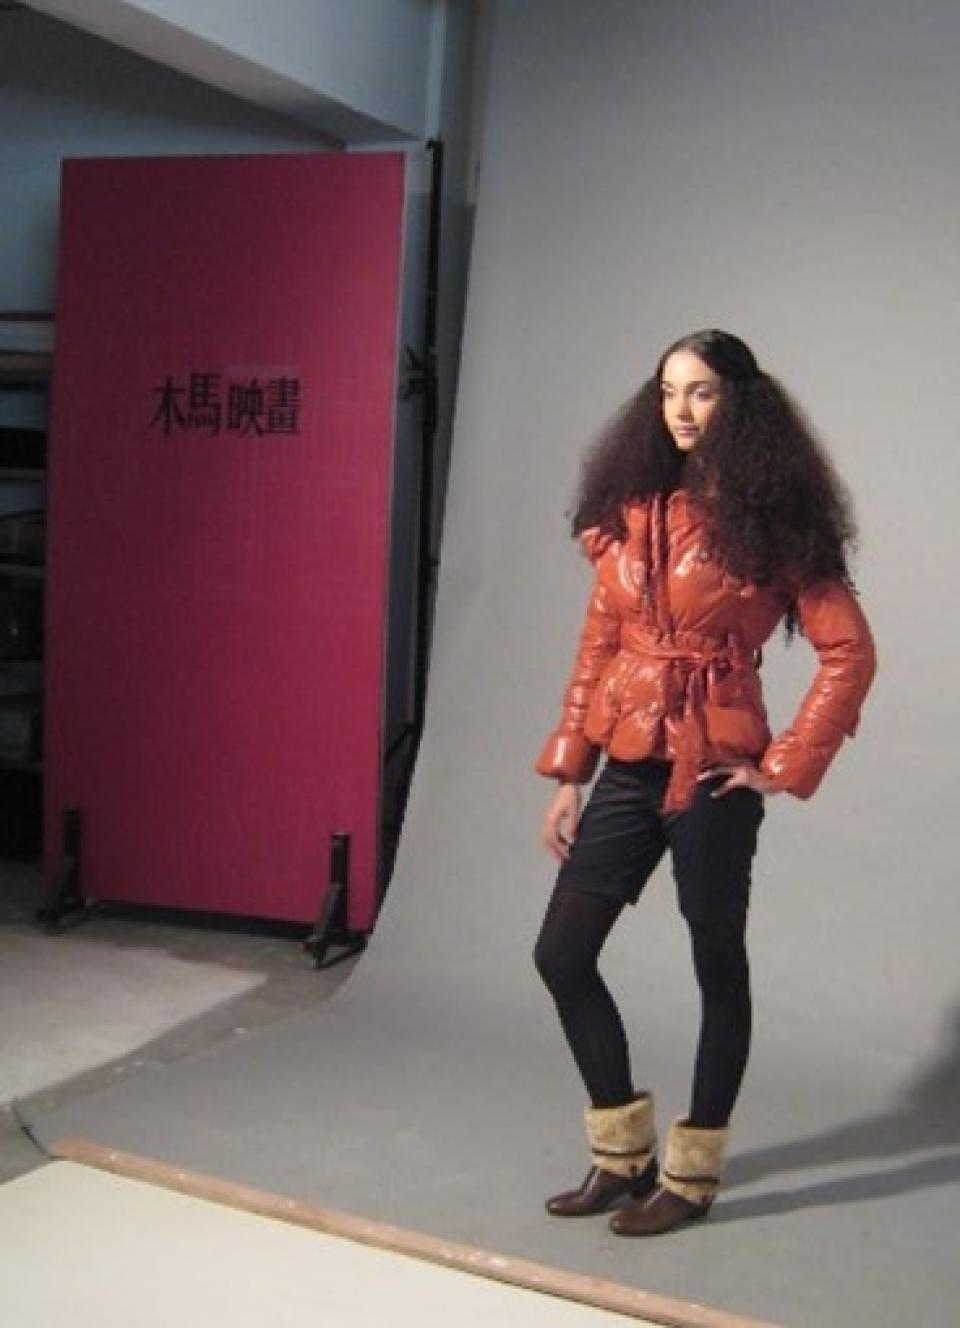 A photo shoot featuring a model who was styled by Faye Wu